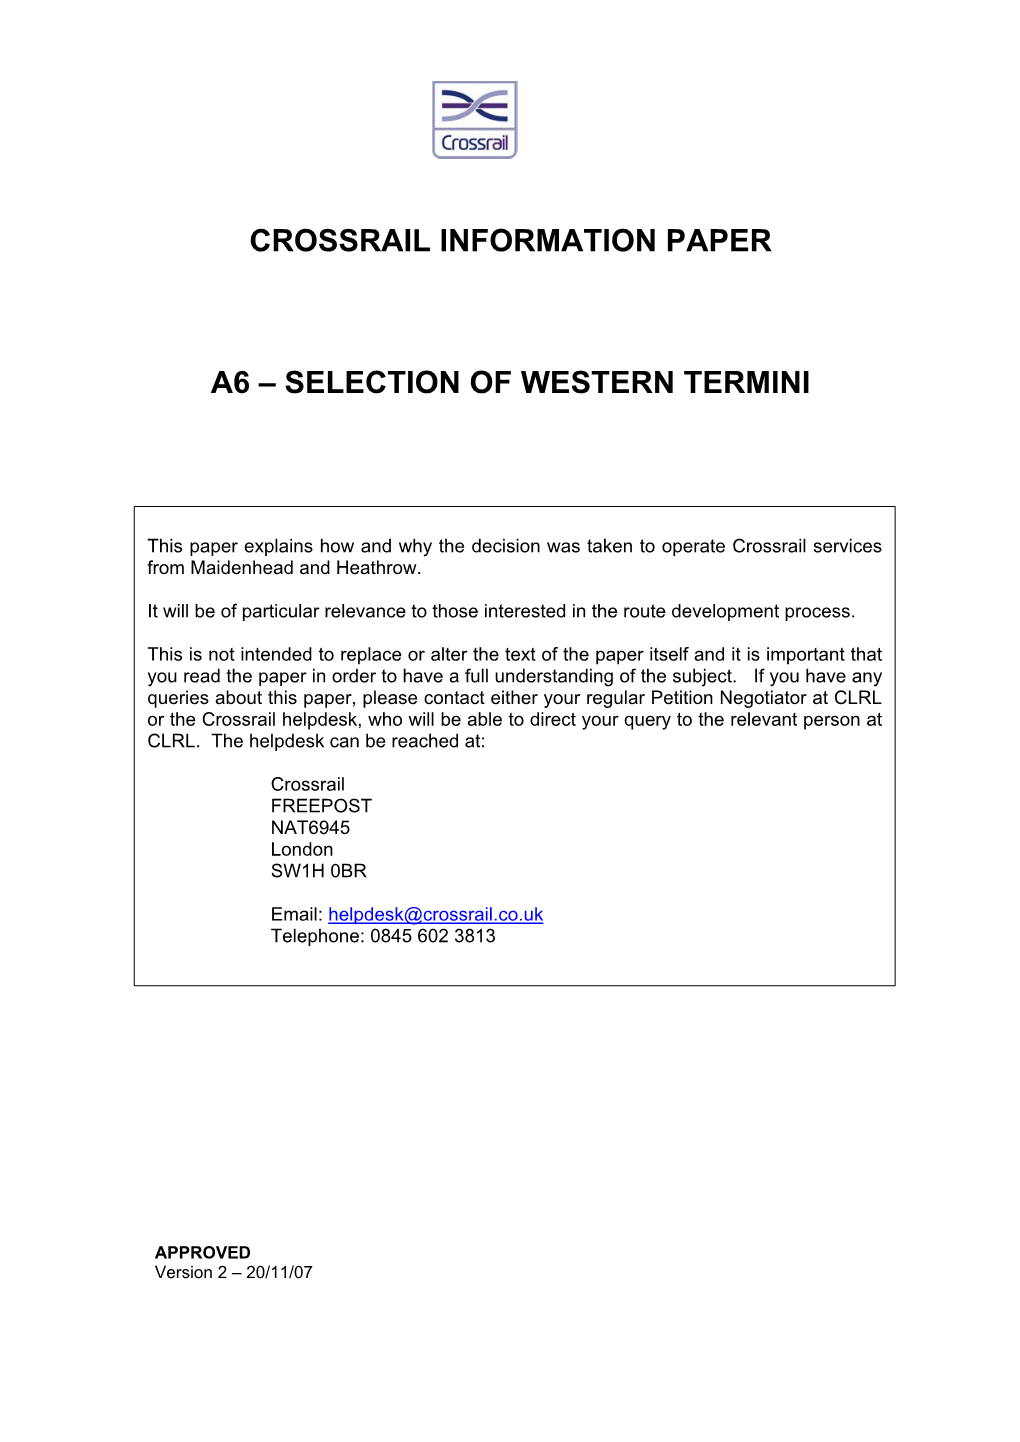 Crossrail Information Paper A6 – Selection of Western